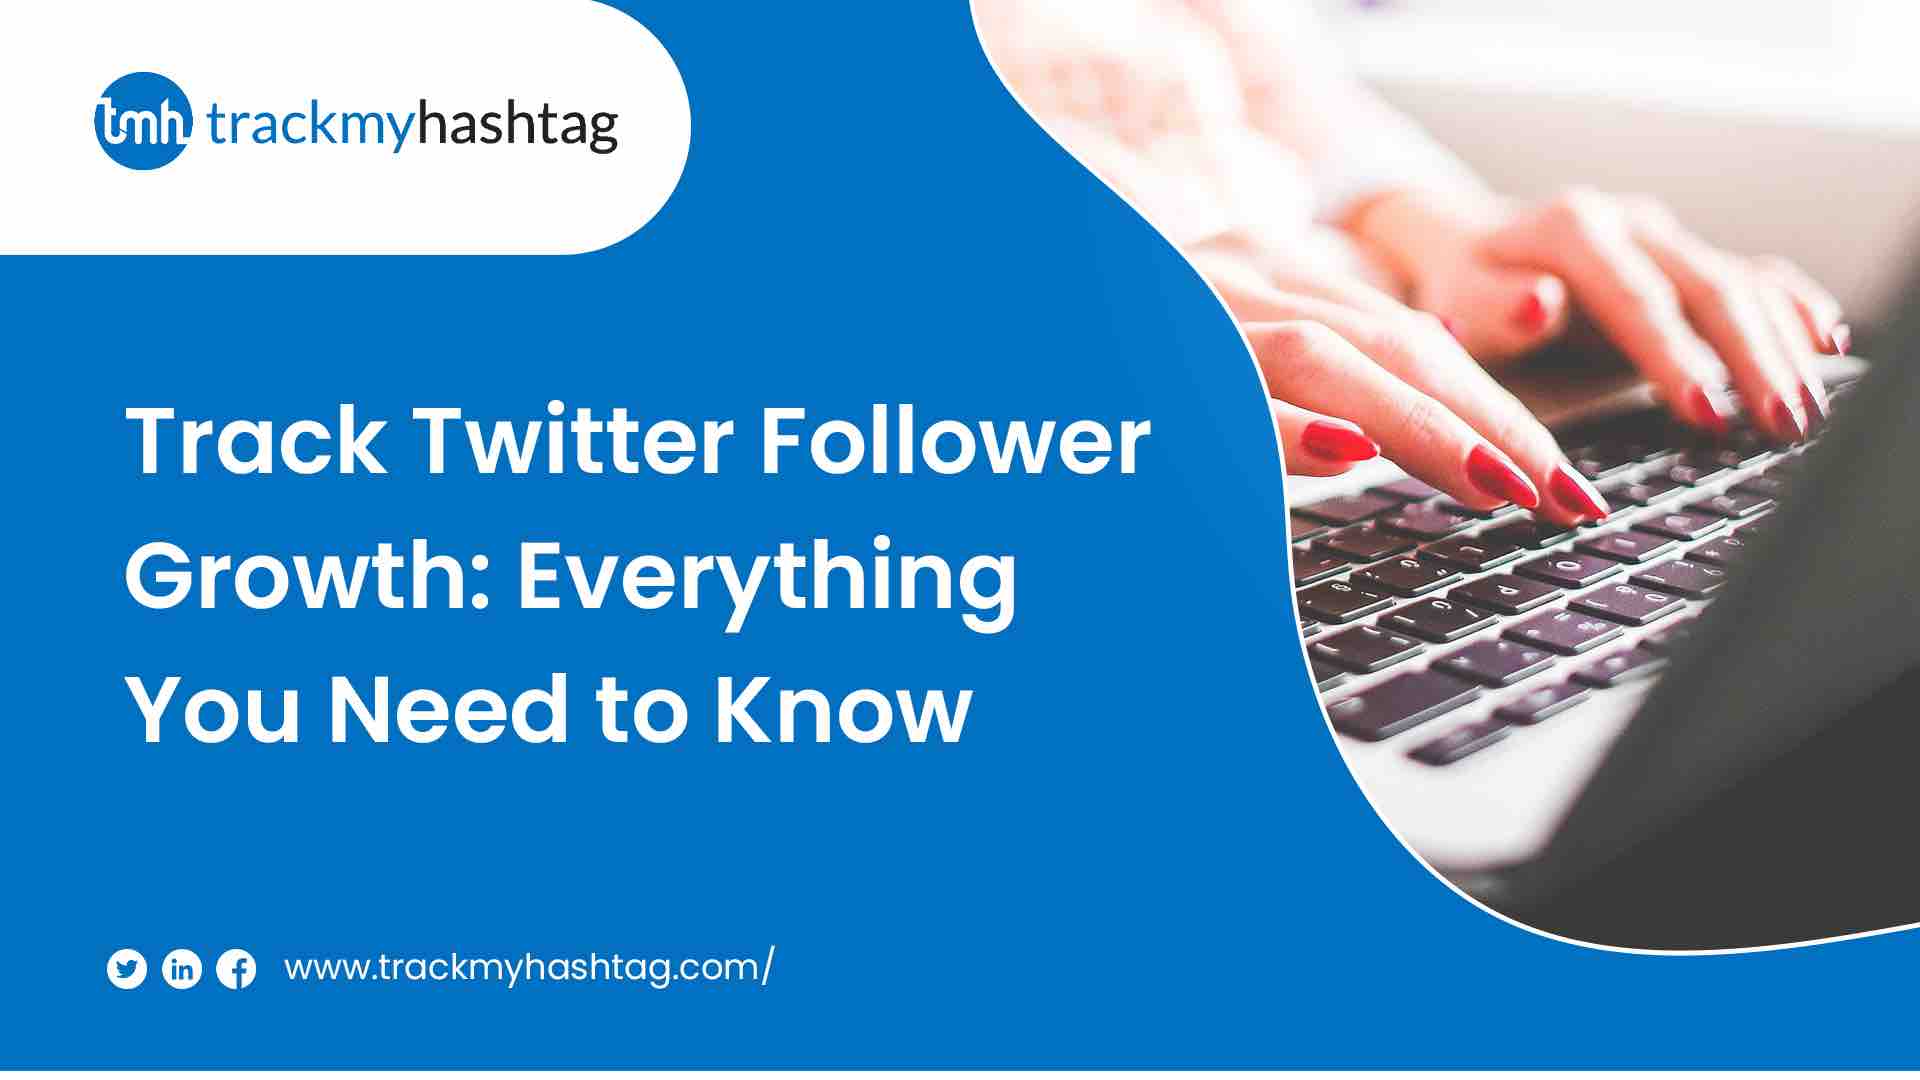 Track Twitter Follower Growth: Everything You Need to Know